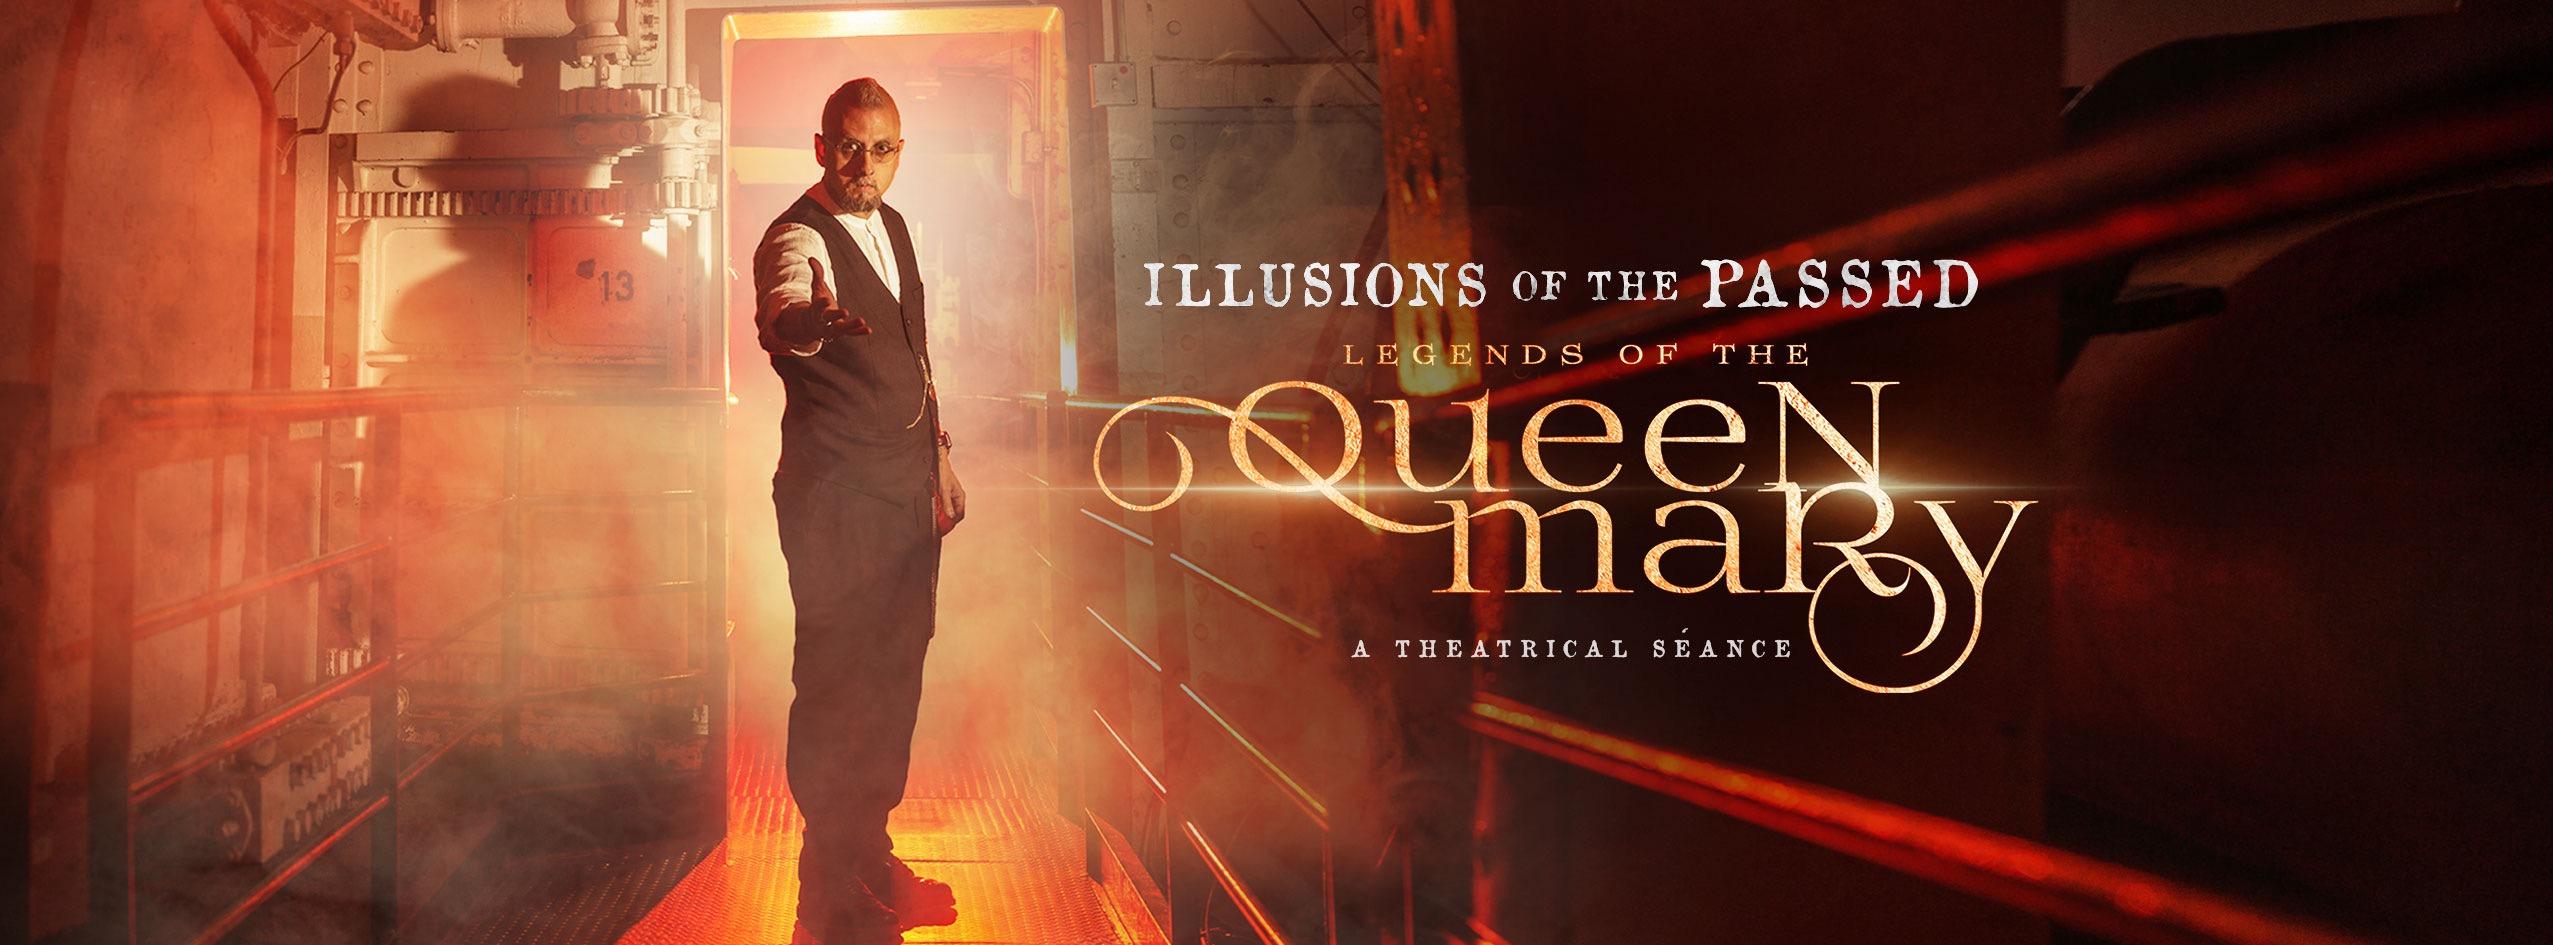 Illusions of the Passed; Legends of the Queen Mary